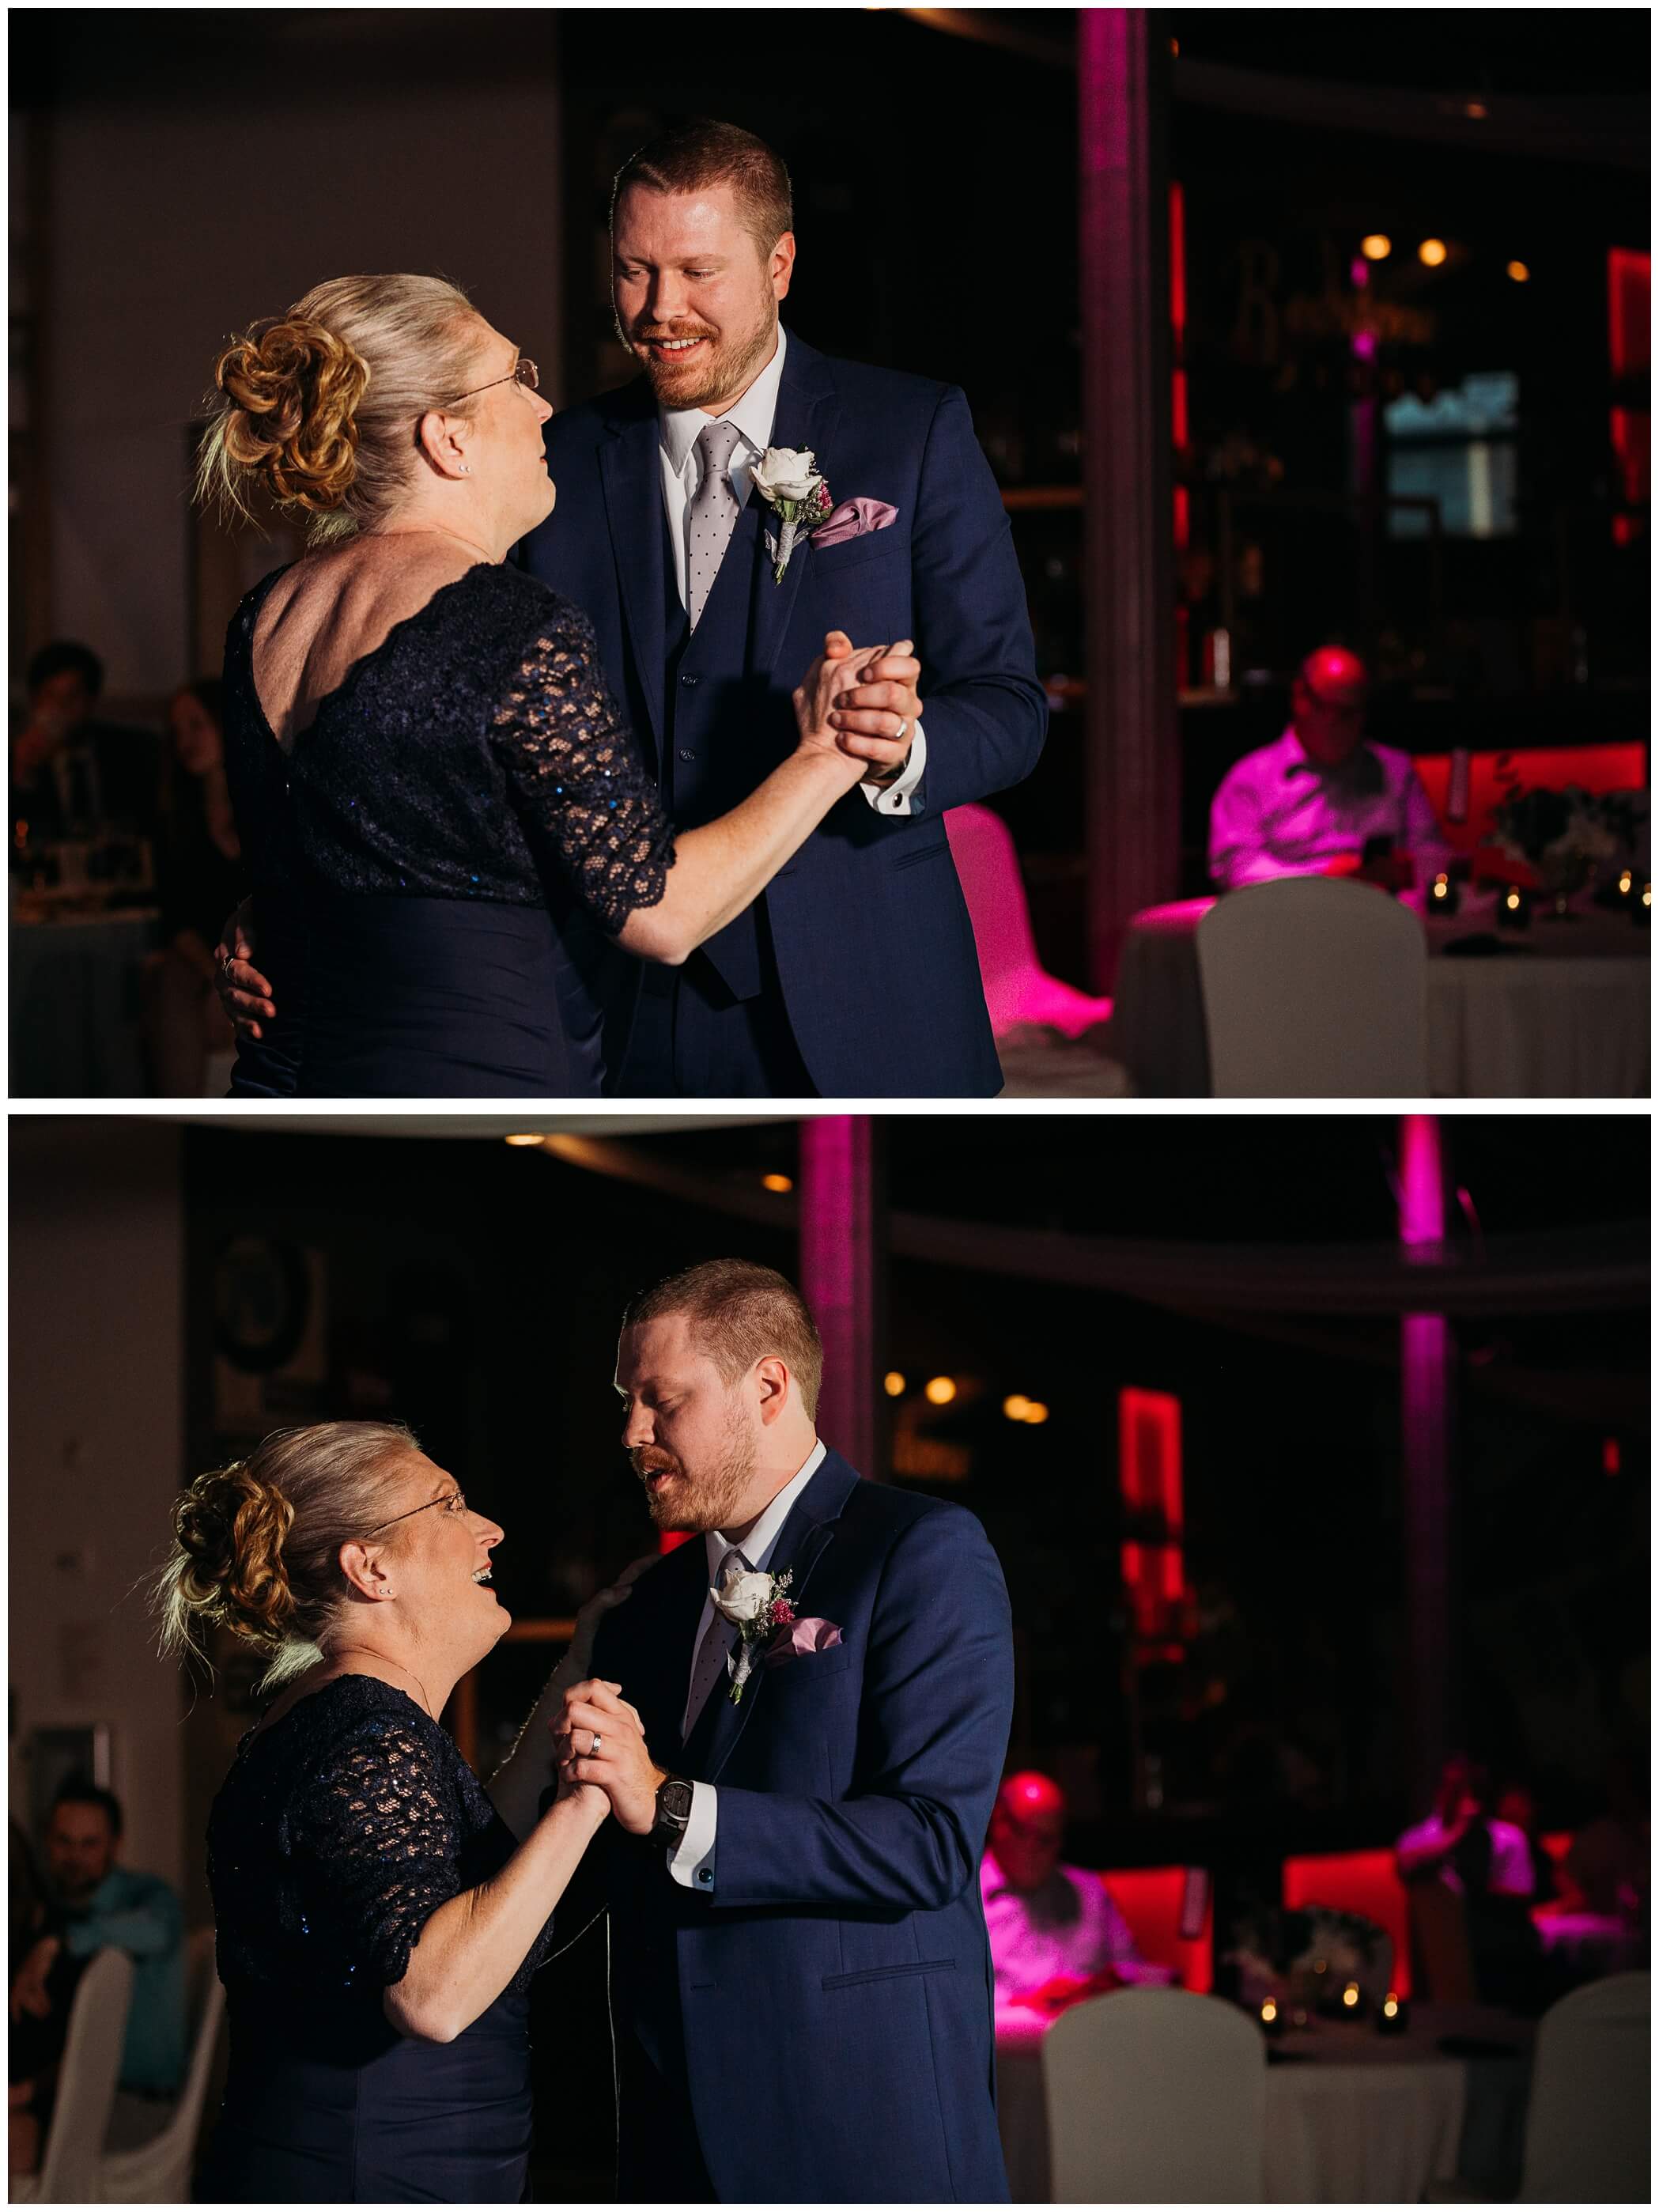 Mother-Son dance during a wedding reception at Common Chord in Davenport.